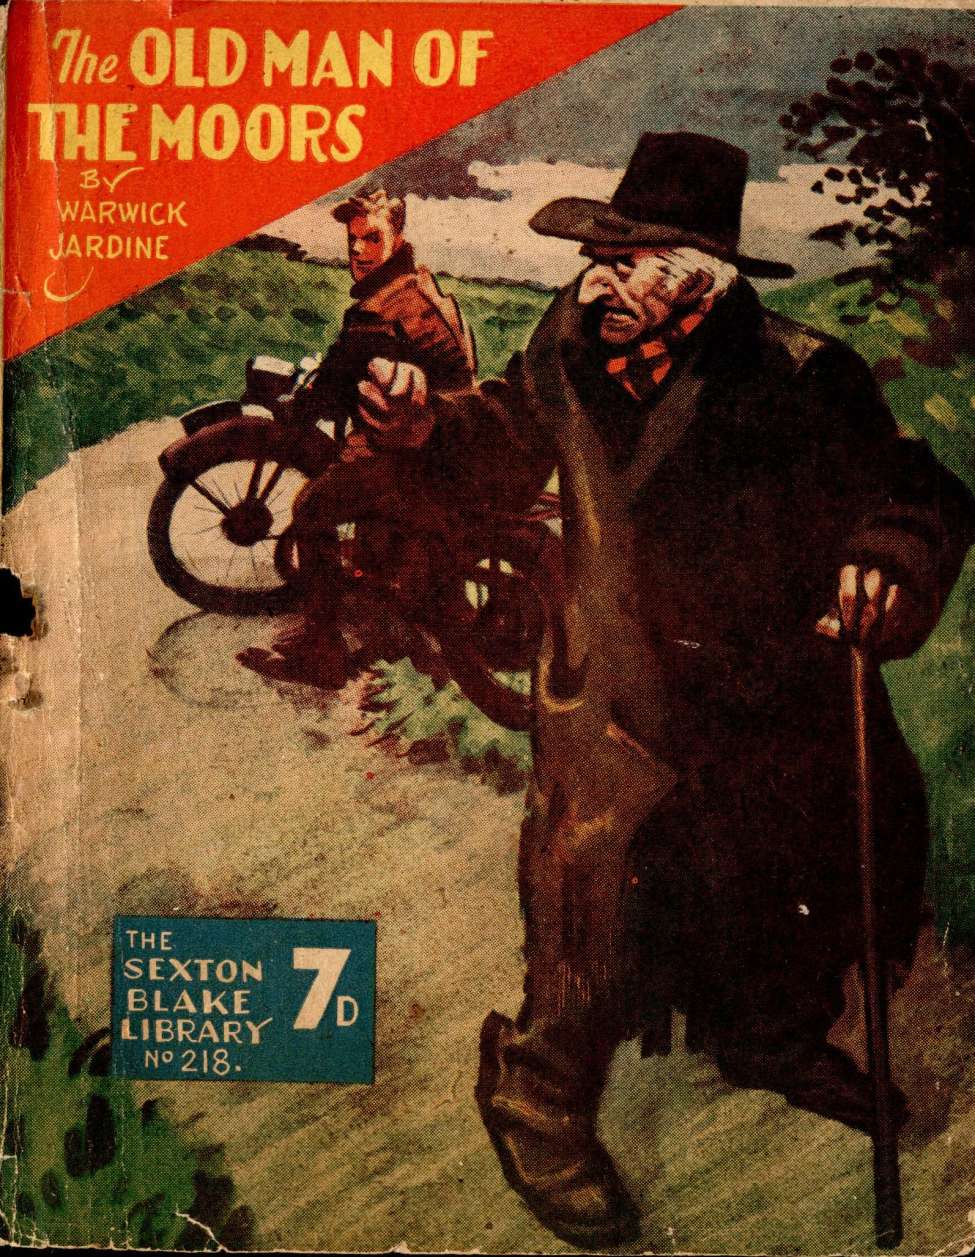 Book Cover For Sexton Blake Library S3 218 - The Old Man of the Moors